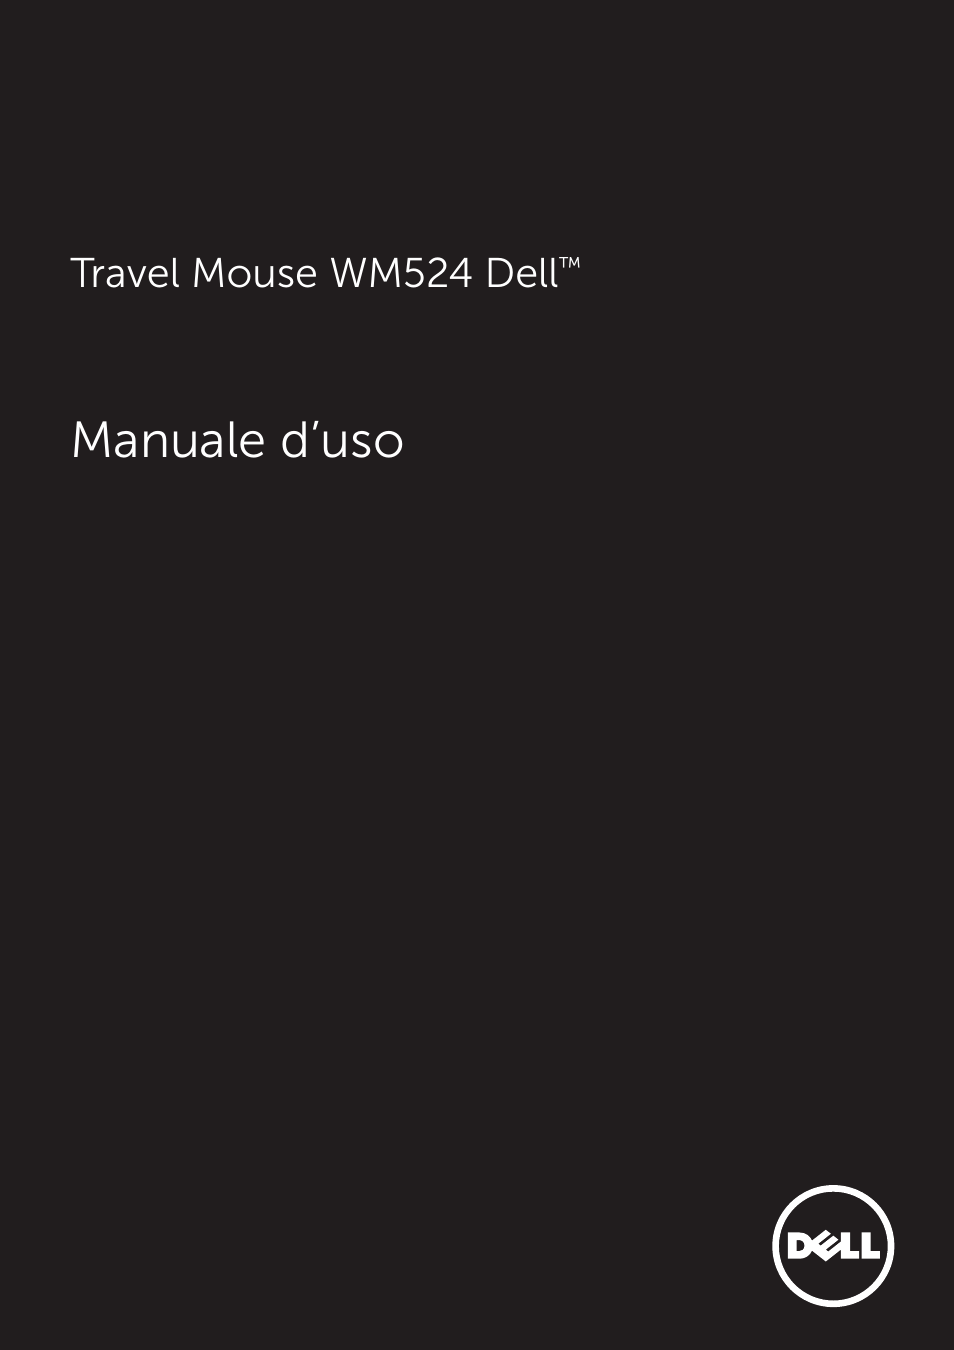 Dell Travel Mouse WM524 Manuale d'uso | Pagine: 18